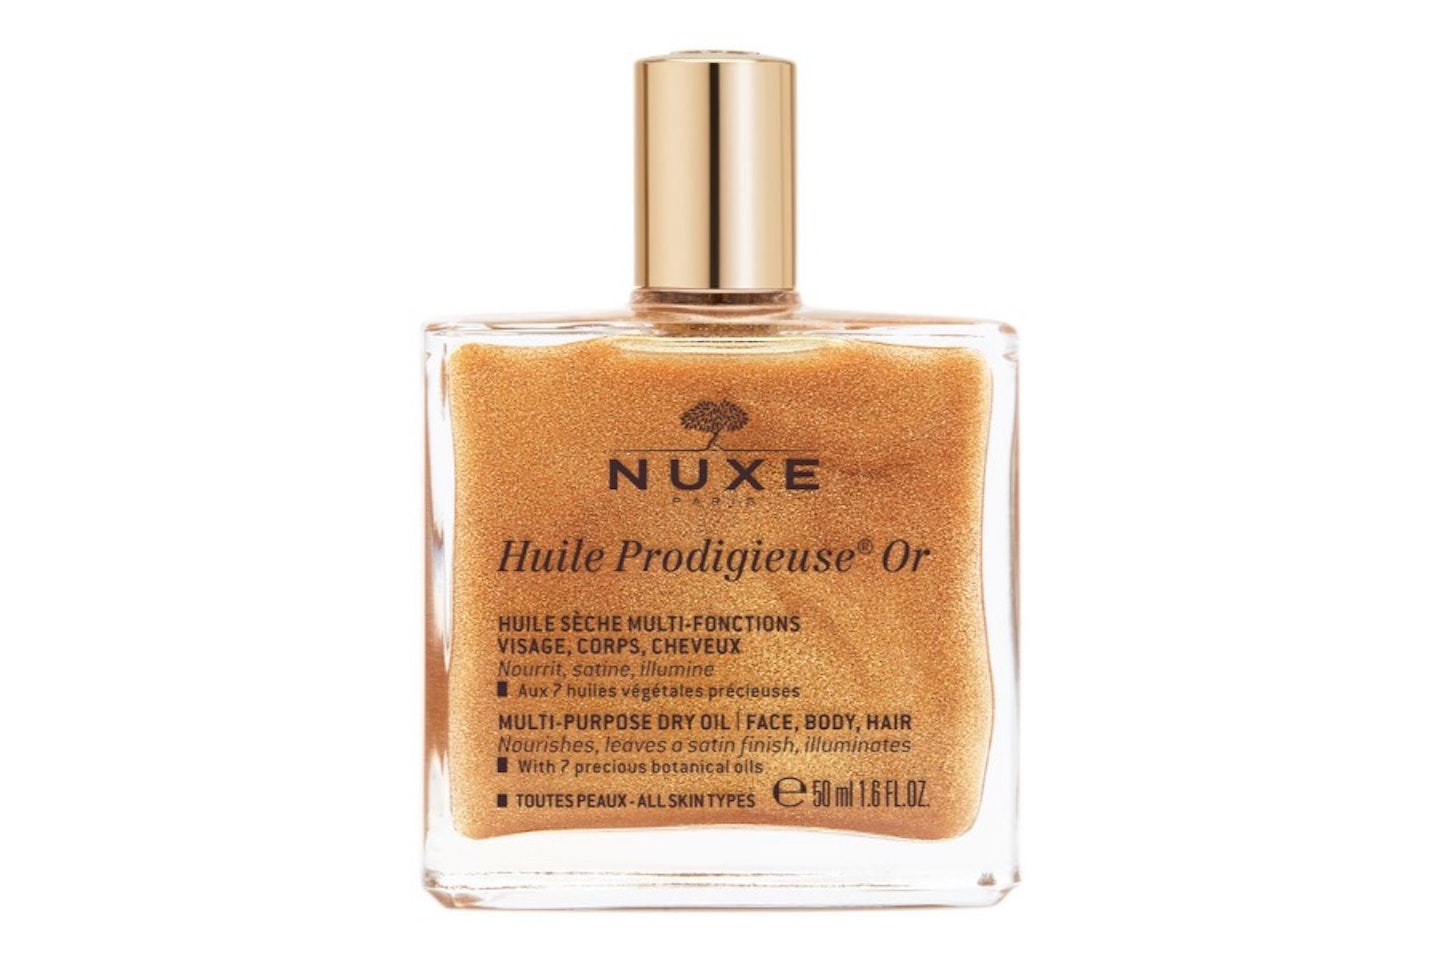 NUXE Huile Prodigieuse Or Golden Shimmer Multi-Purpose Dry Oil for Face, Body and Hair